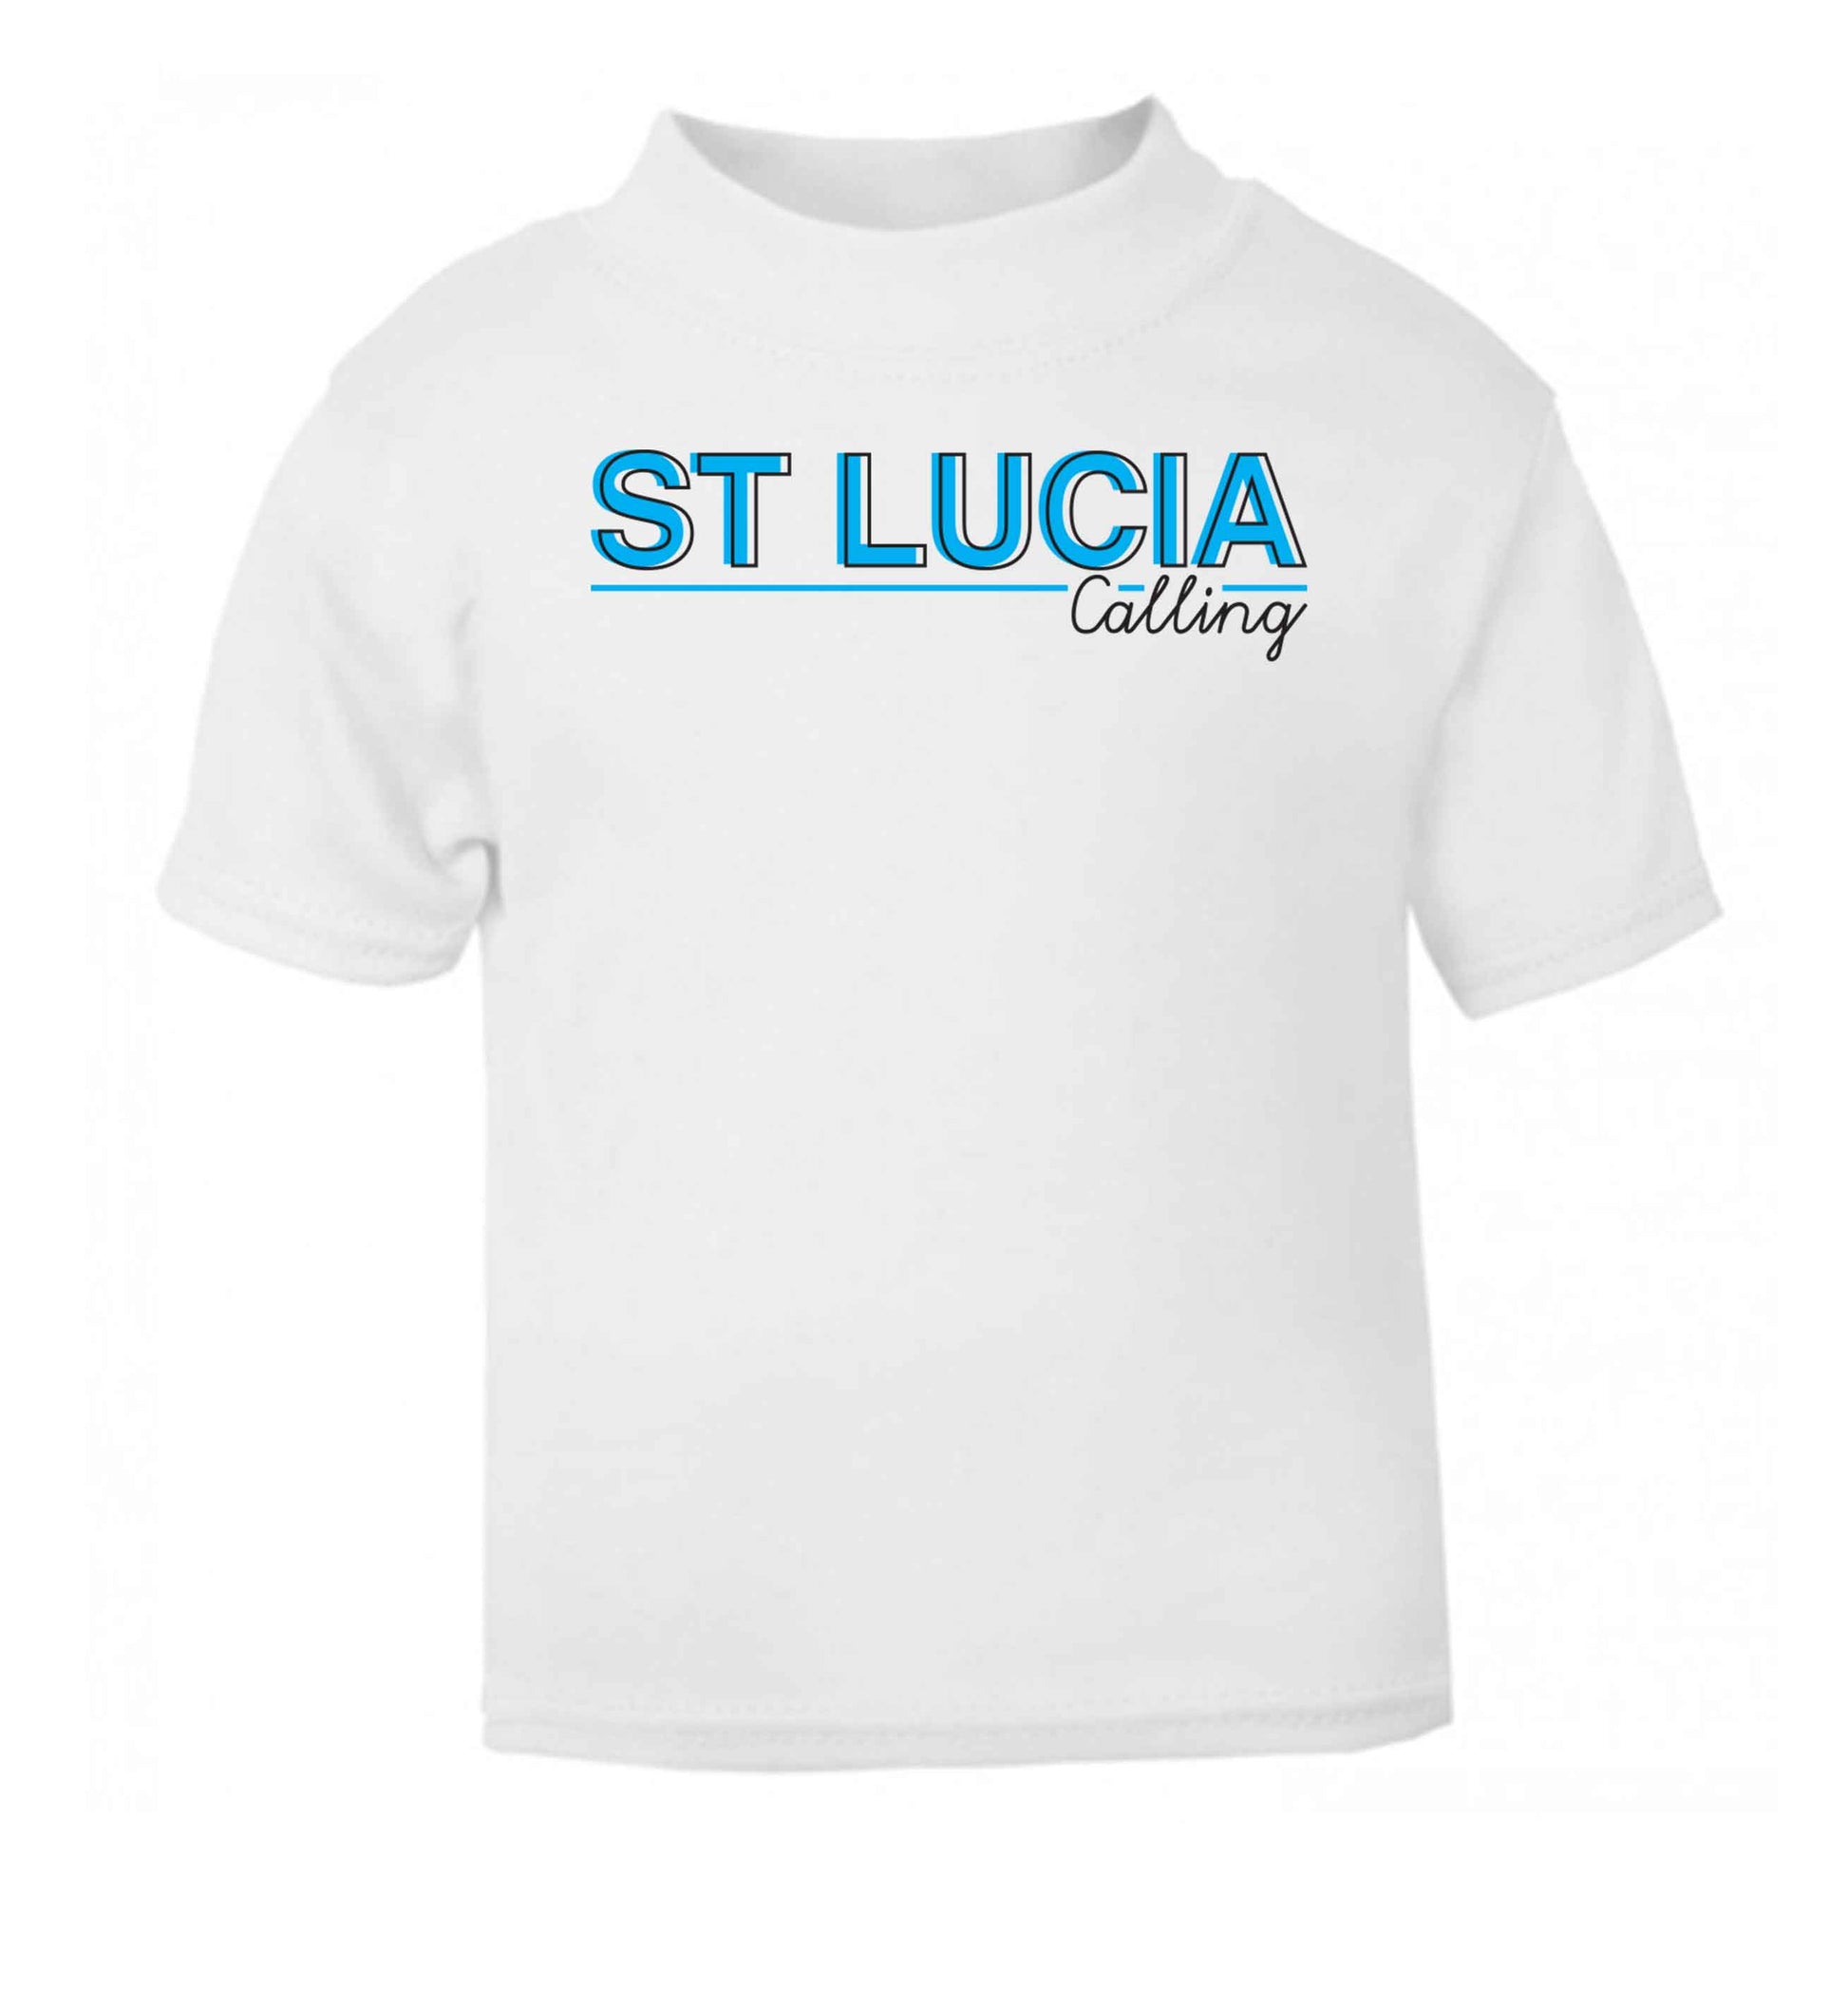 St Lucia calling white Baby Toddler Tshirt 2 Years